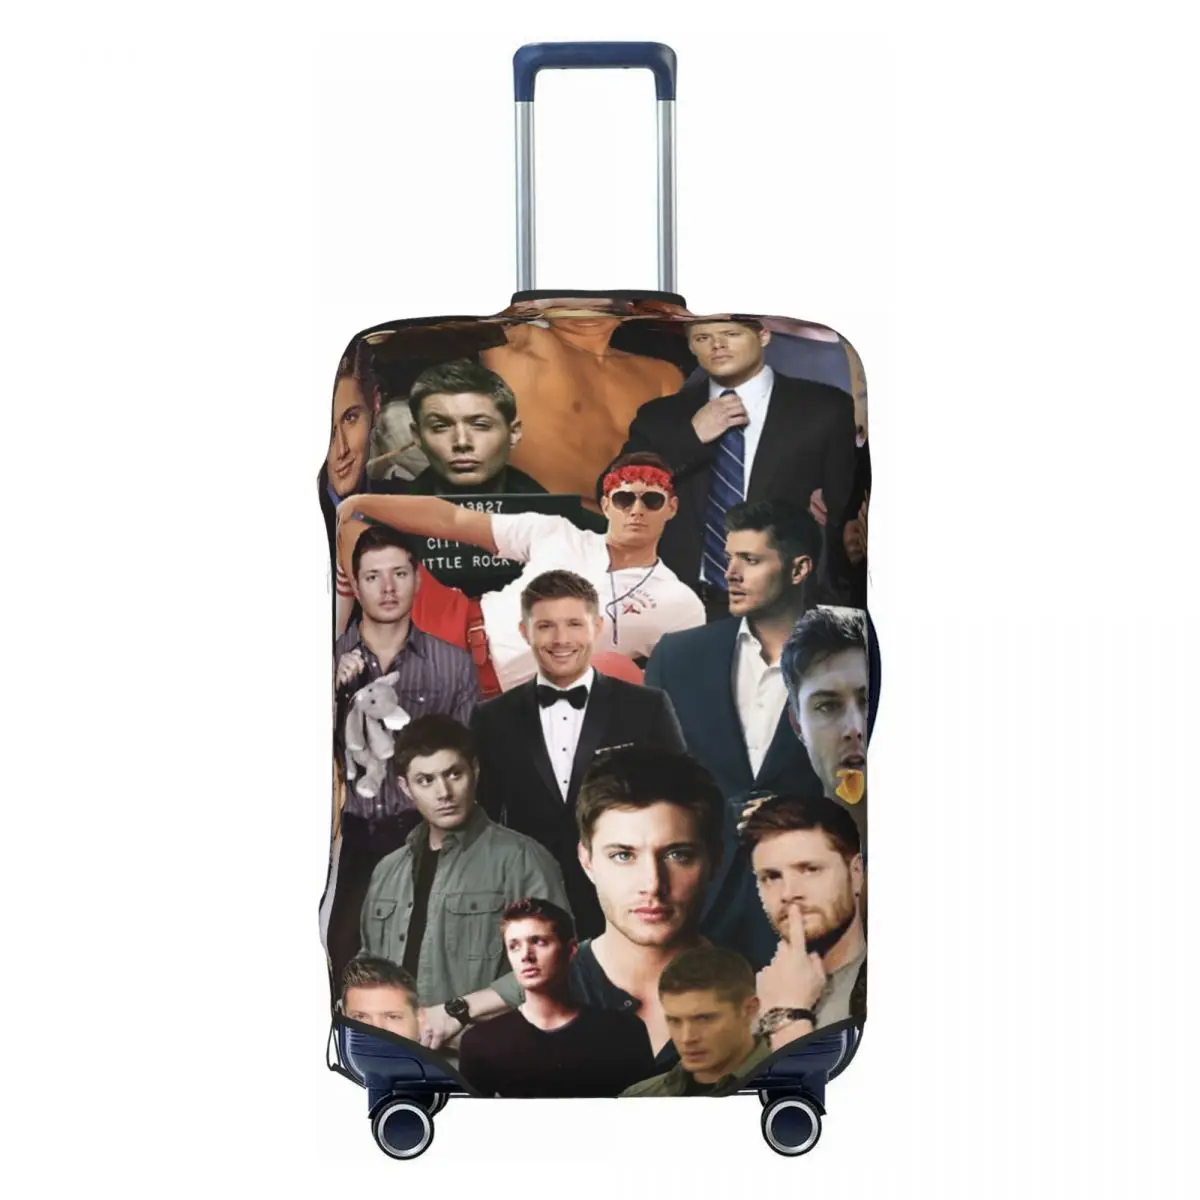 

Jensen Ackles Collage Print Luggage Protective Dust Covers Elastic Waterproof 18-32inch Suitcase Cover Travel Accessories